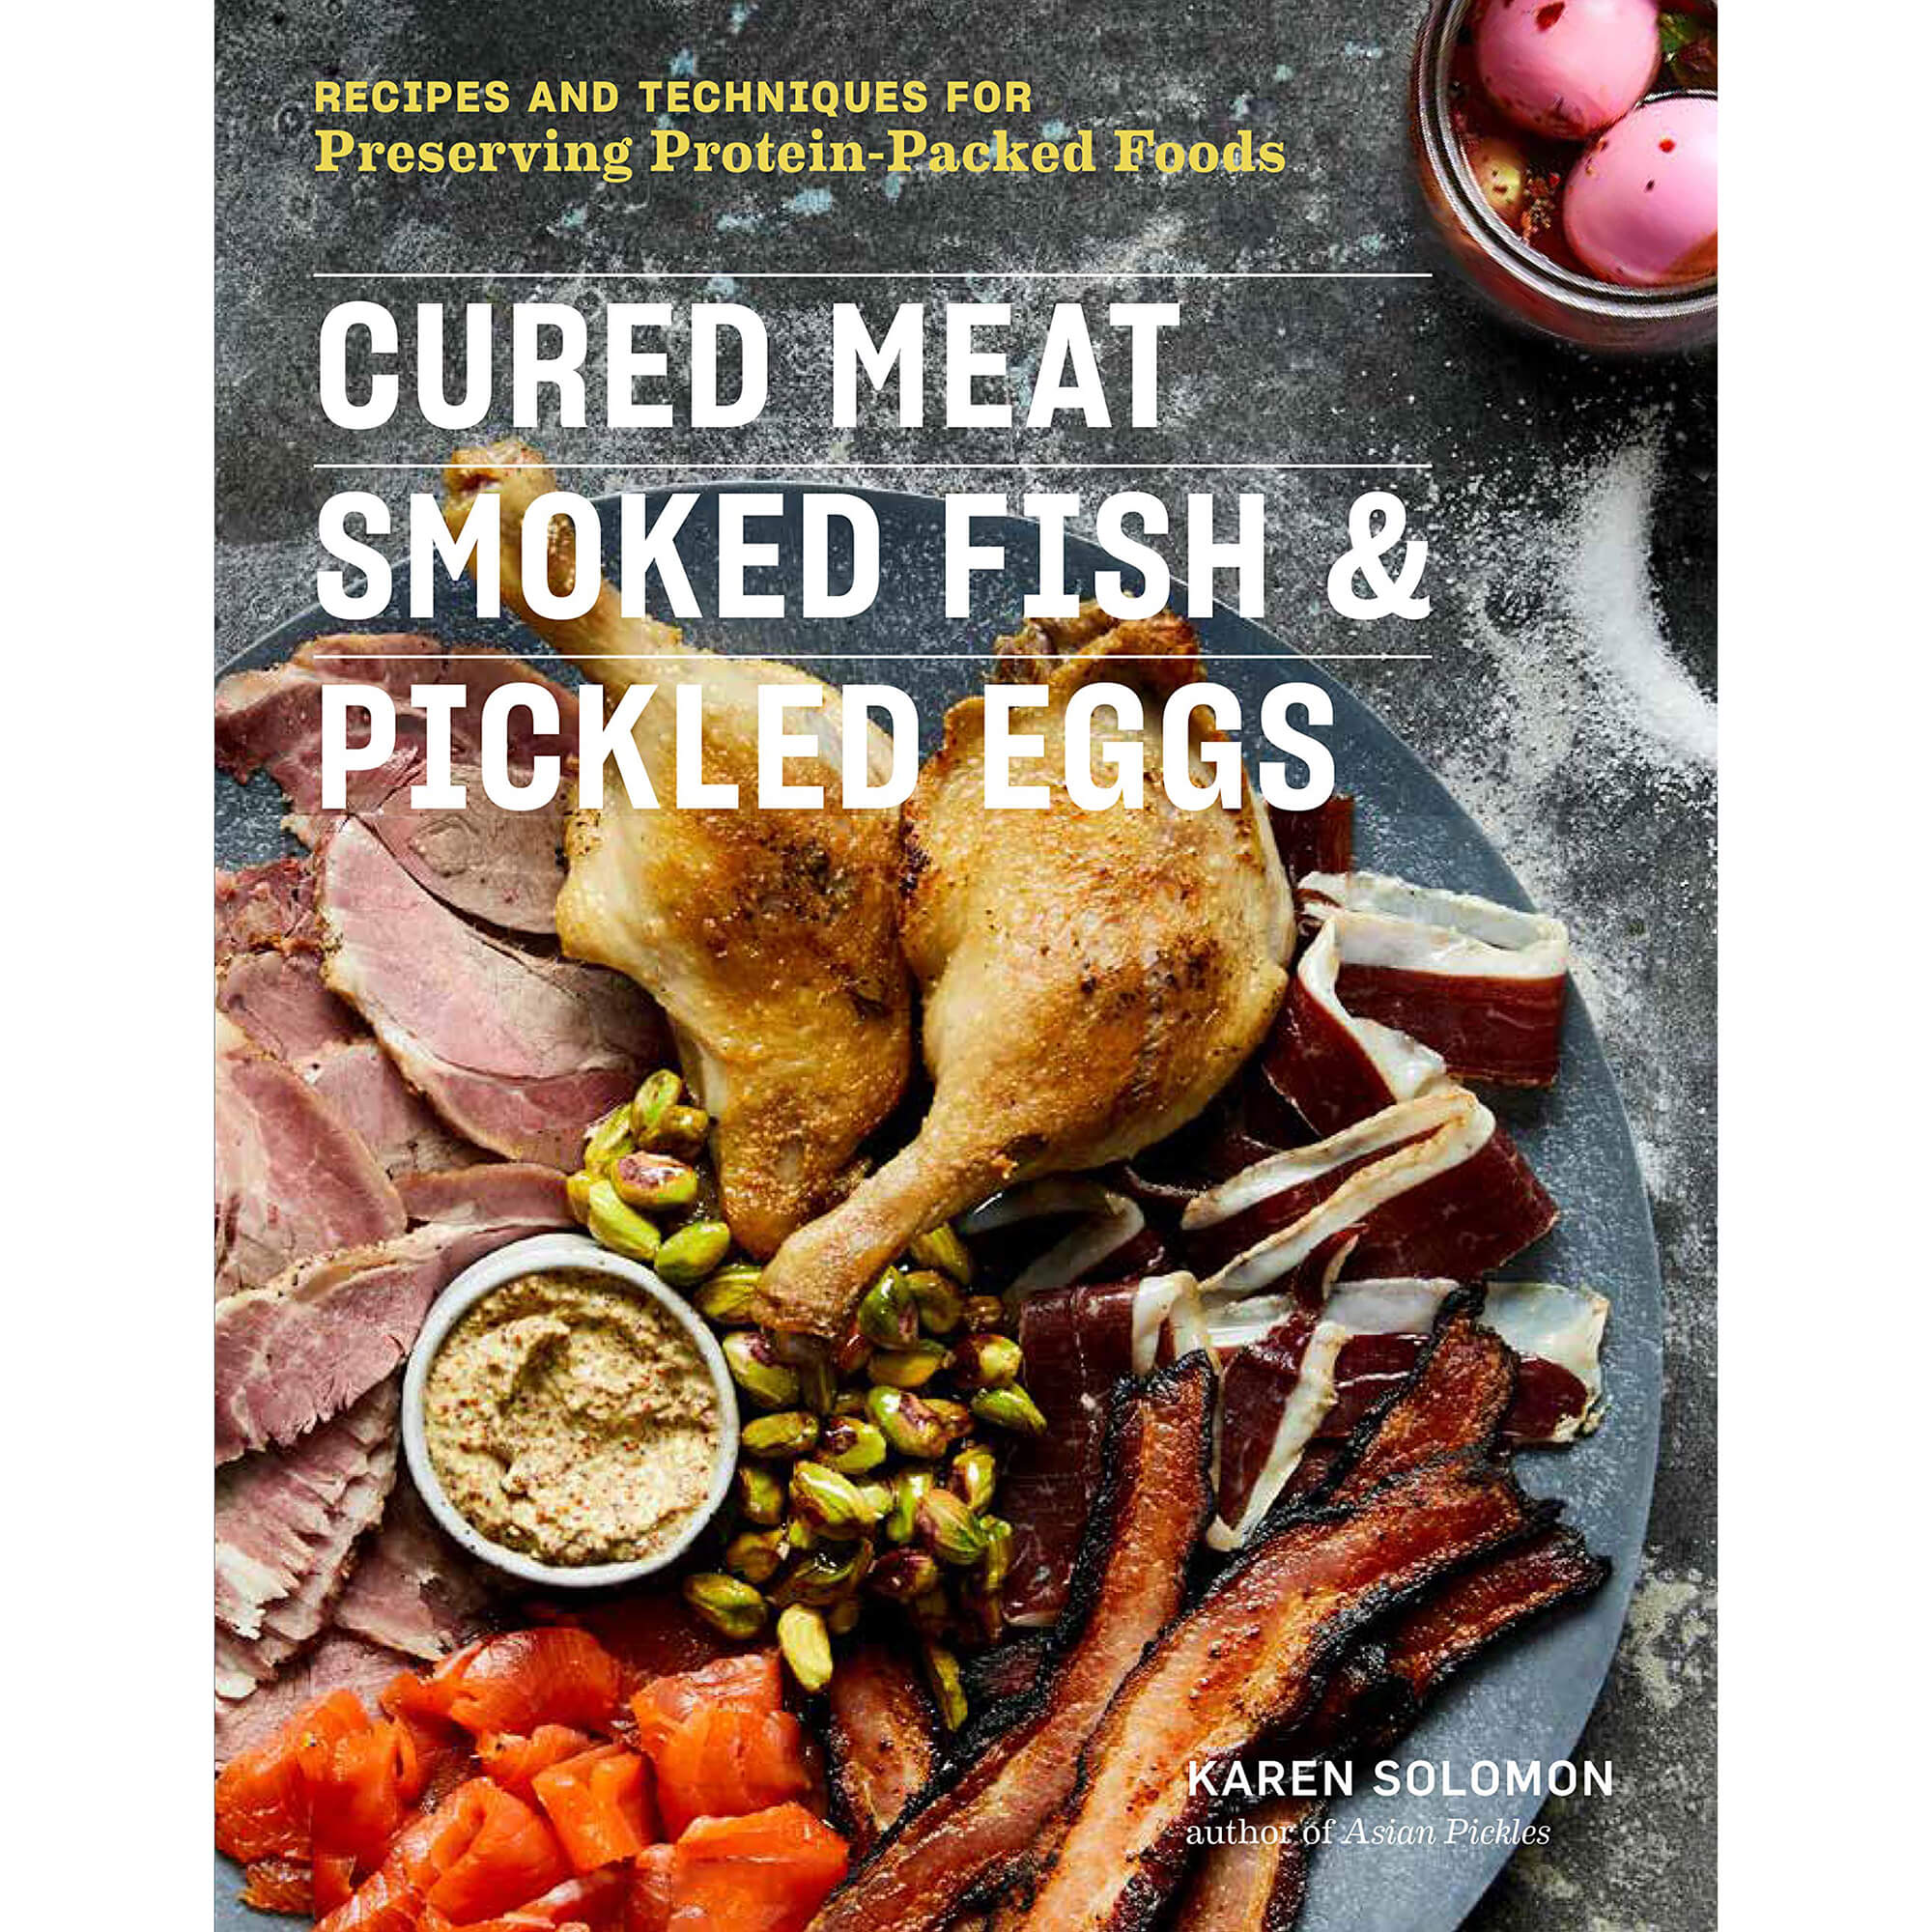 Cured Meat, Smoked Fish & Pickled Eggs front cover.